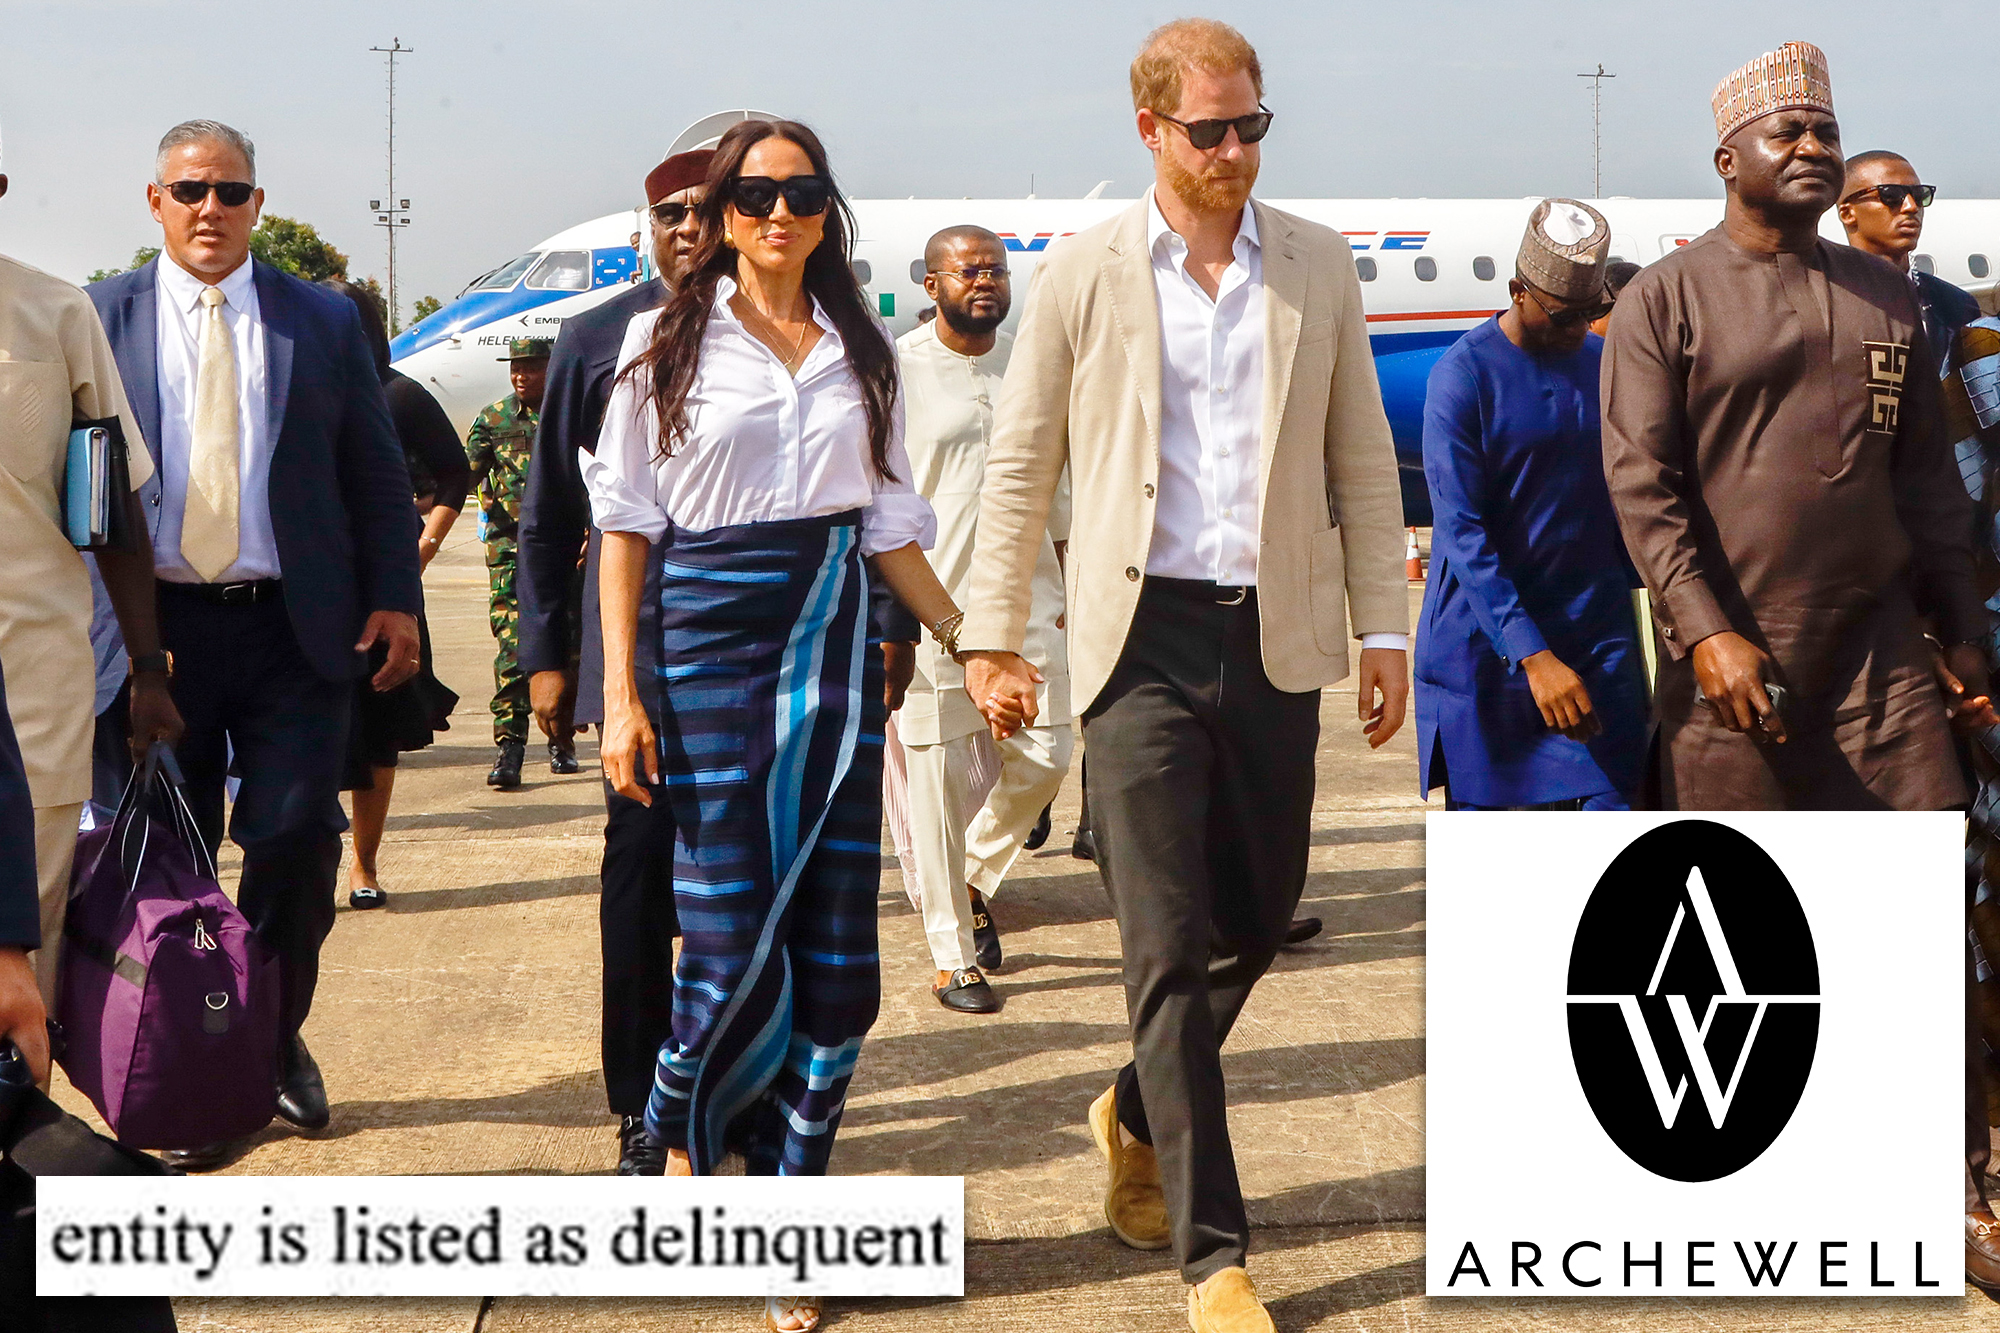 Prince Harry and Meghan Markle's Archewell Foundation Faces Setback